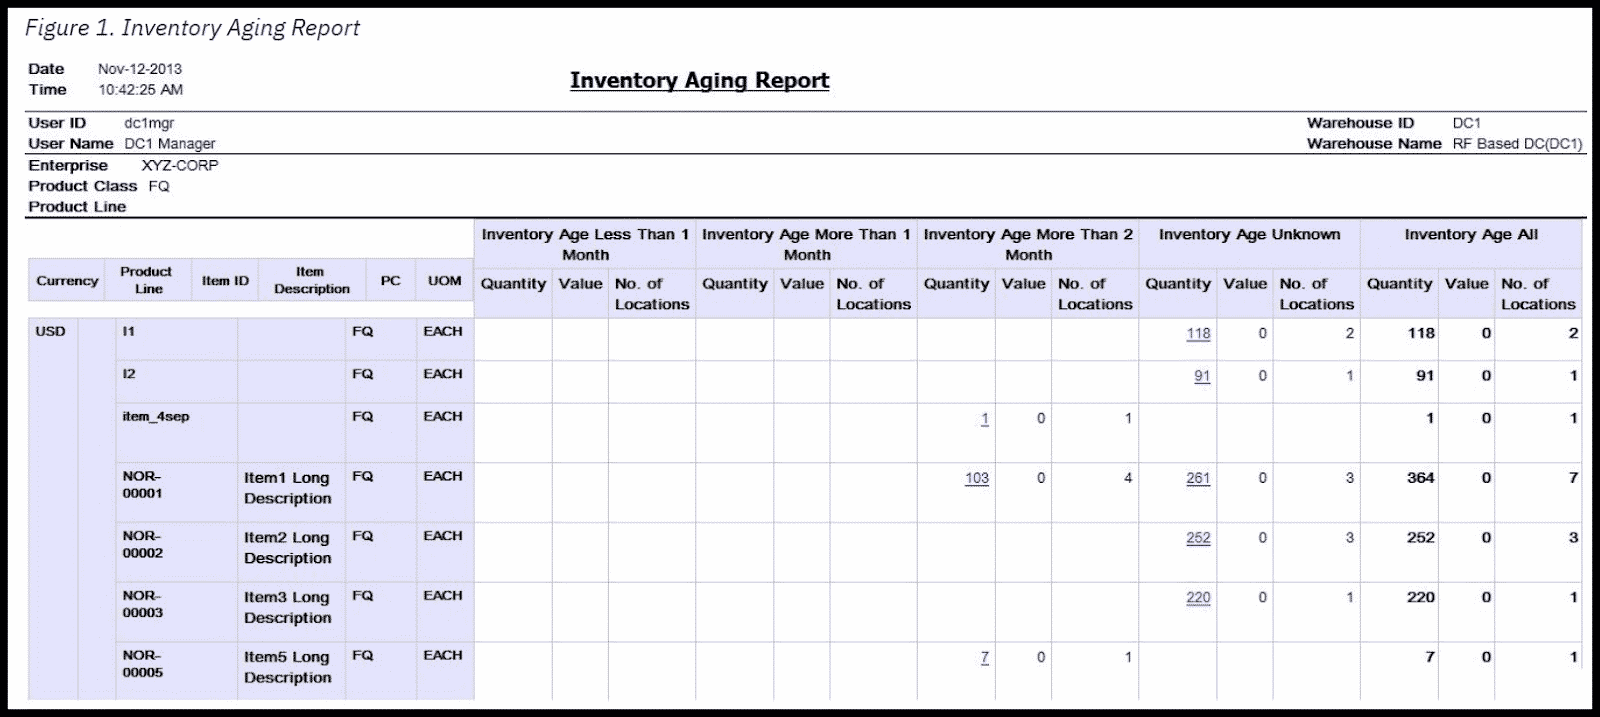 A sample inventory aging report generated in IBM.